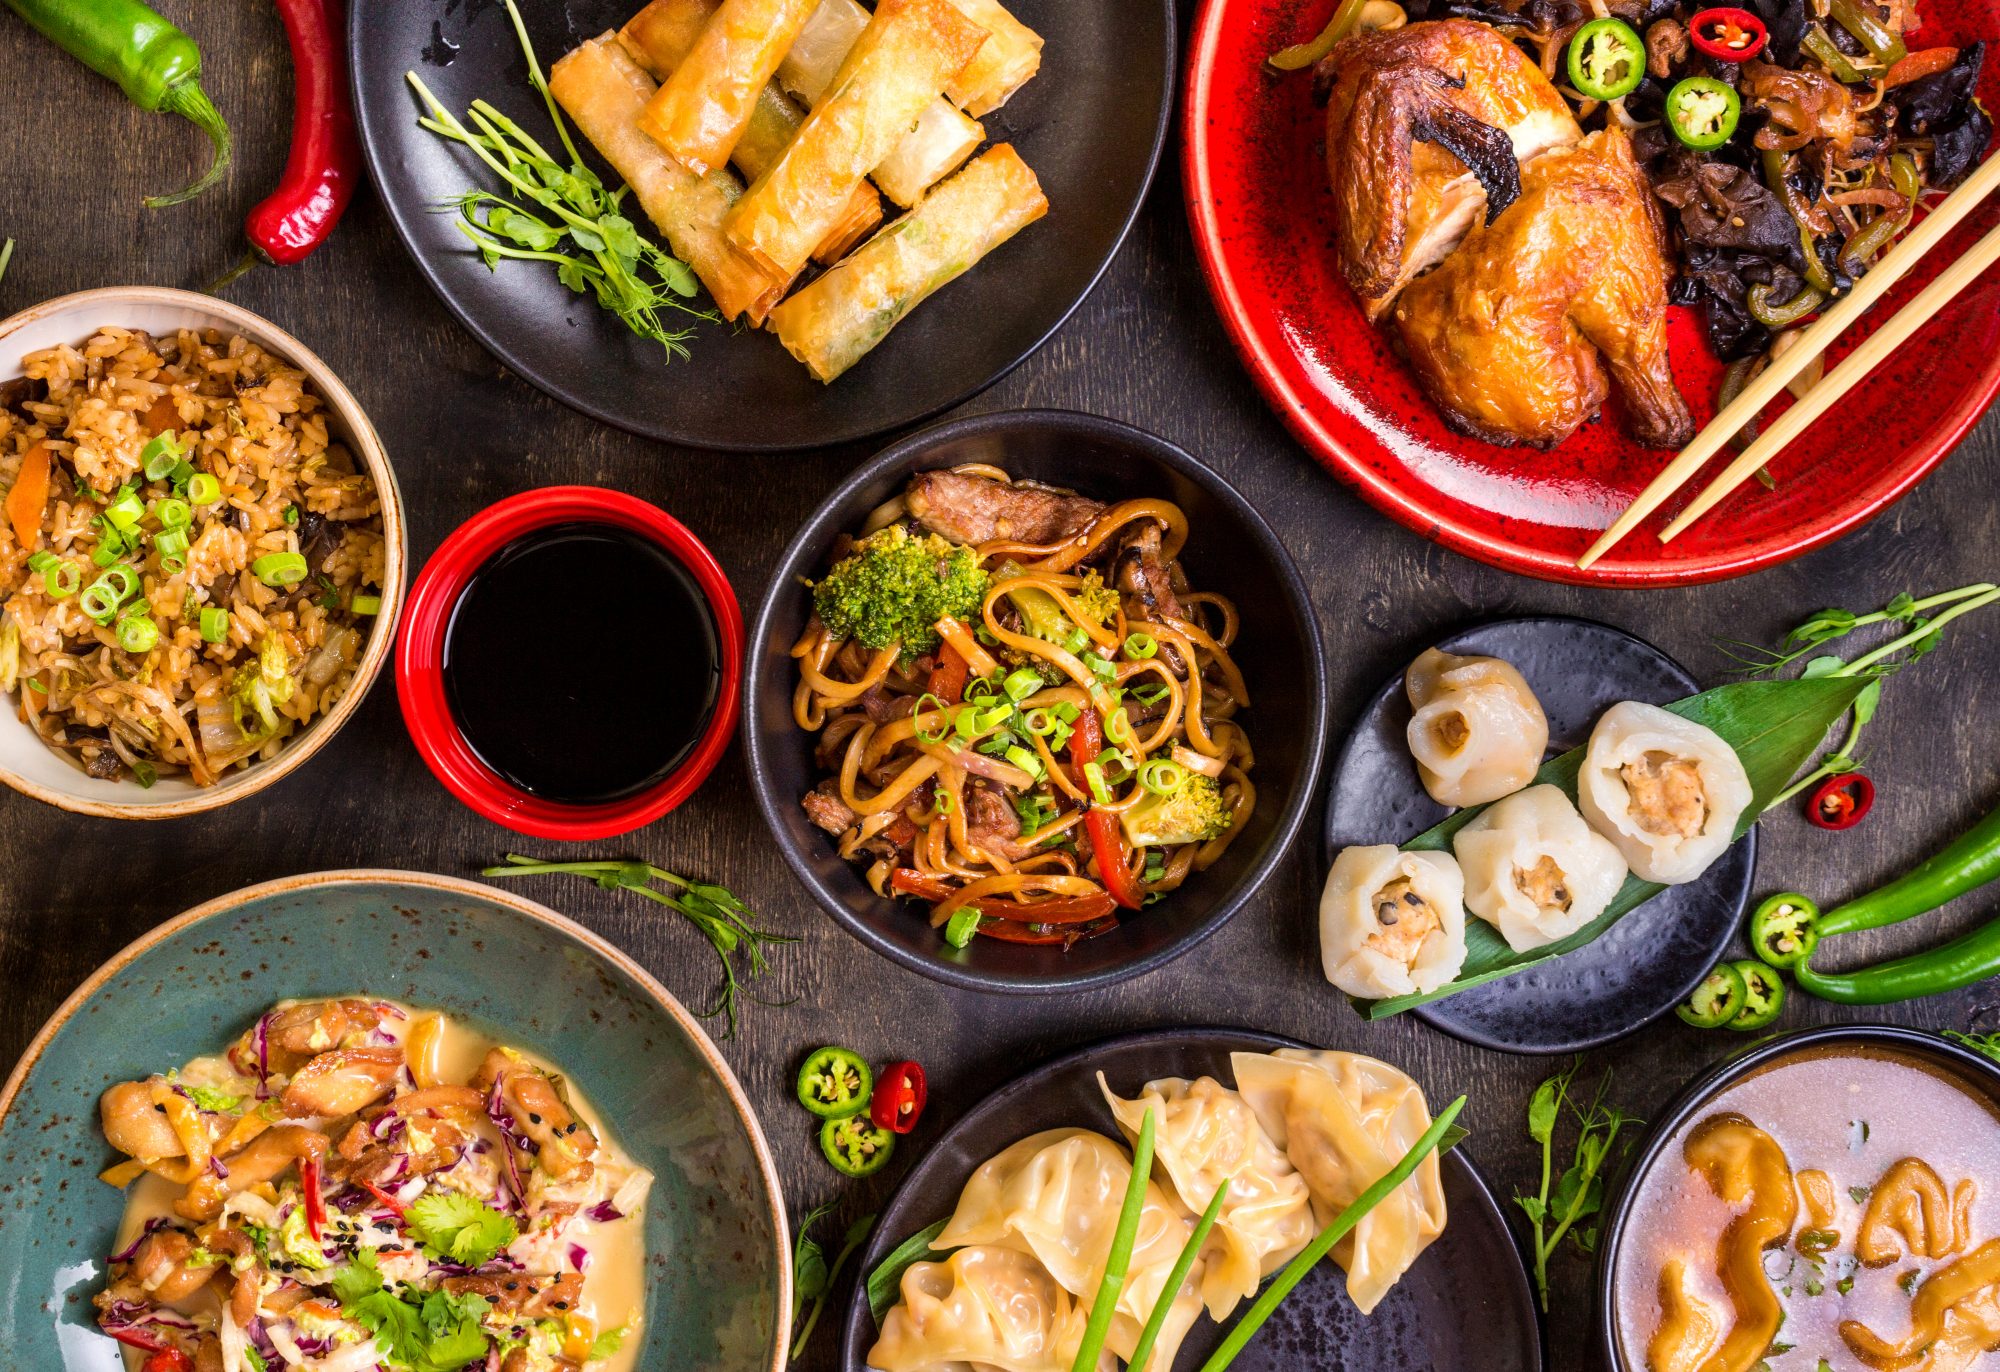  You can find a wide range of Asian dishes in local restaurants